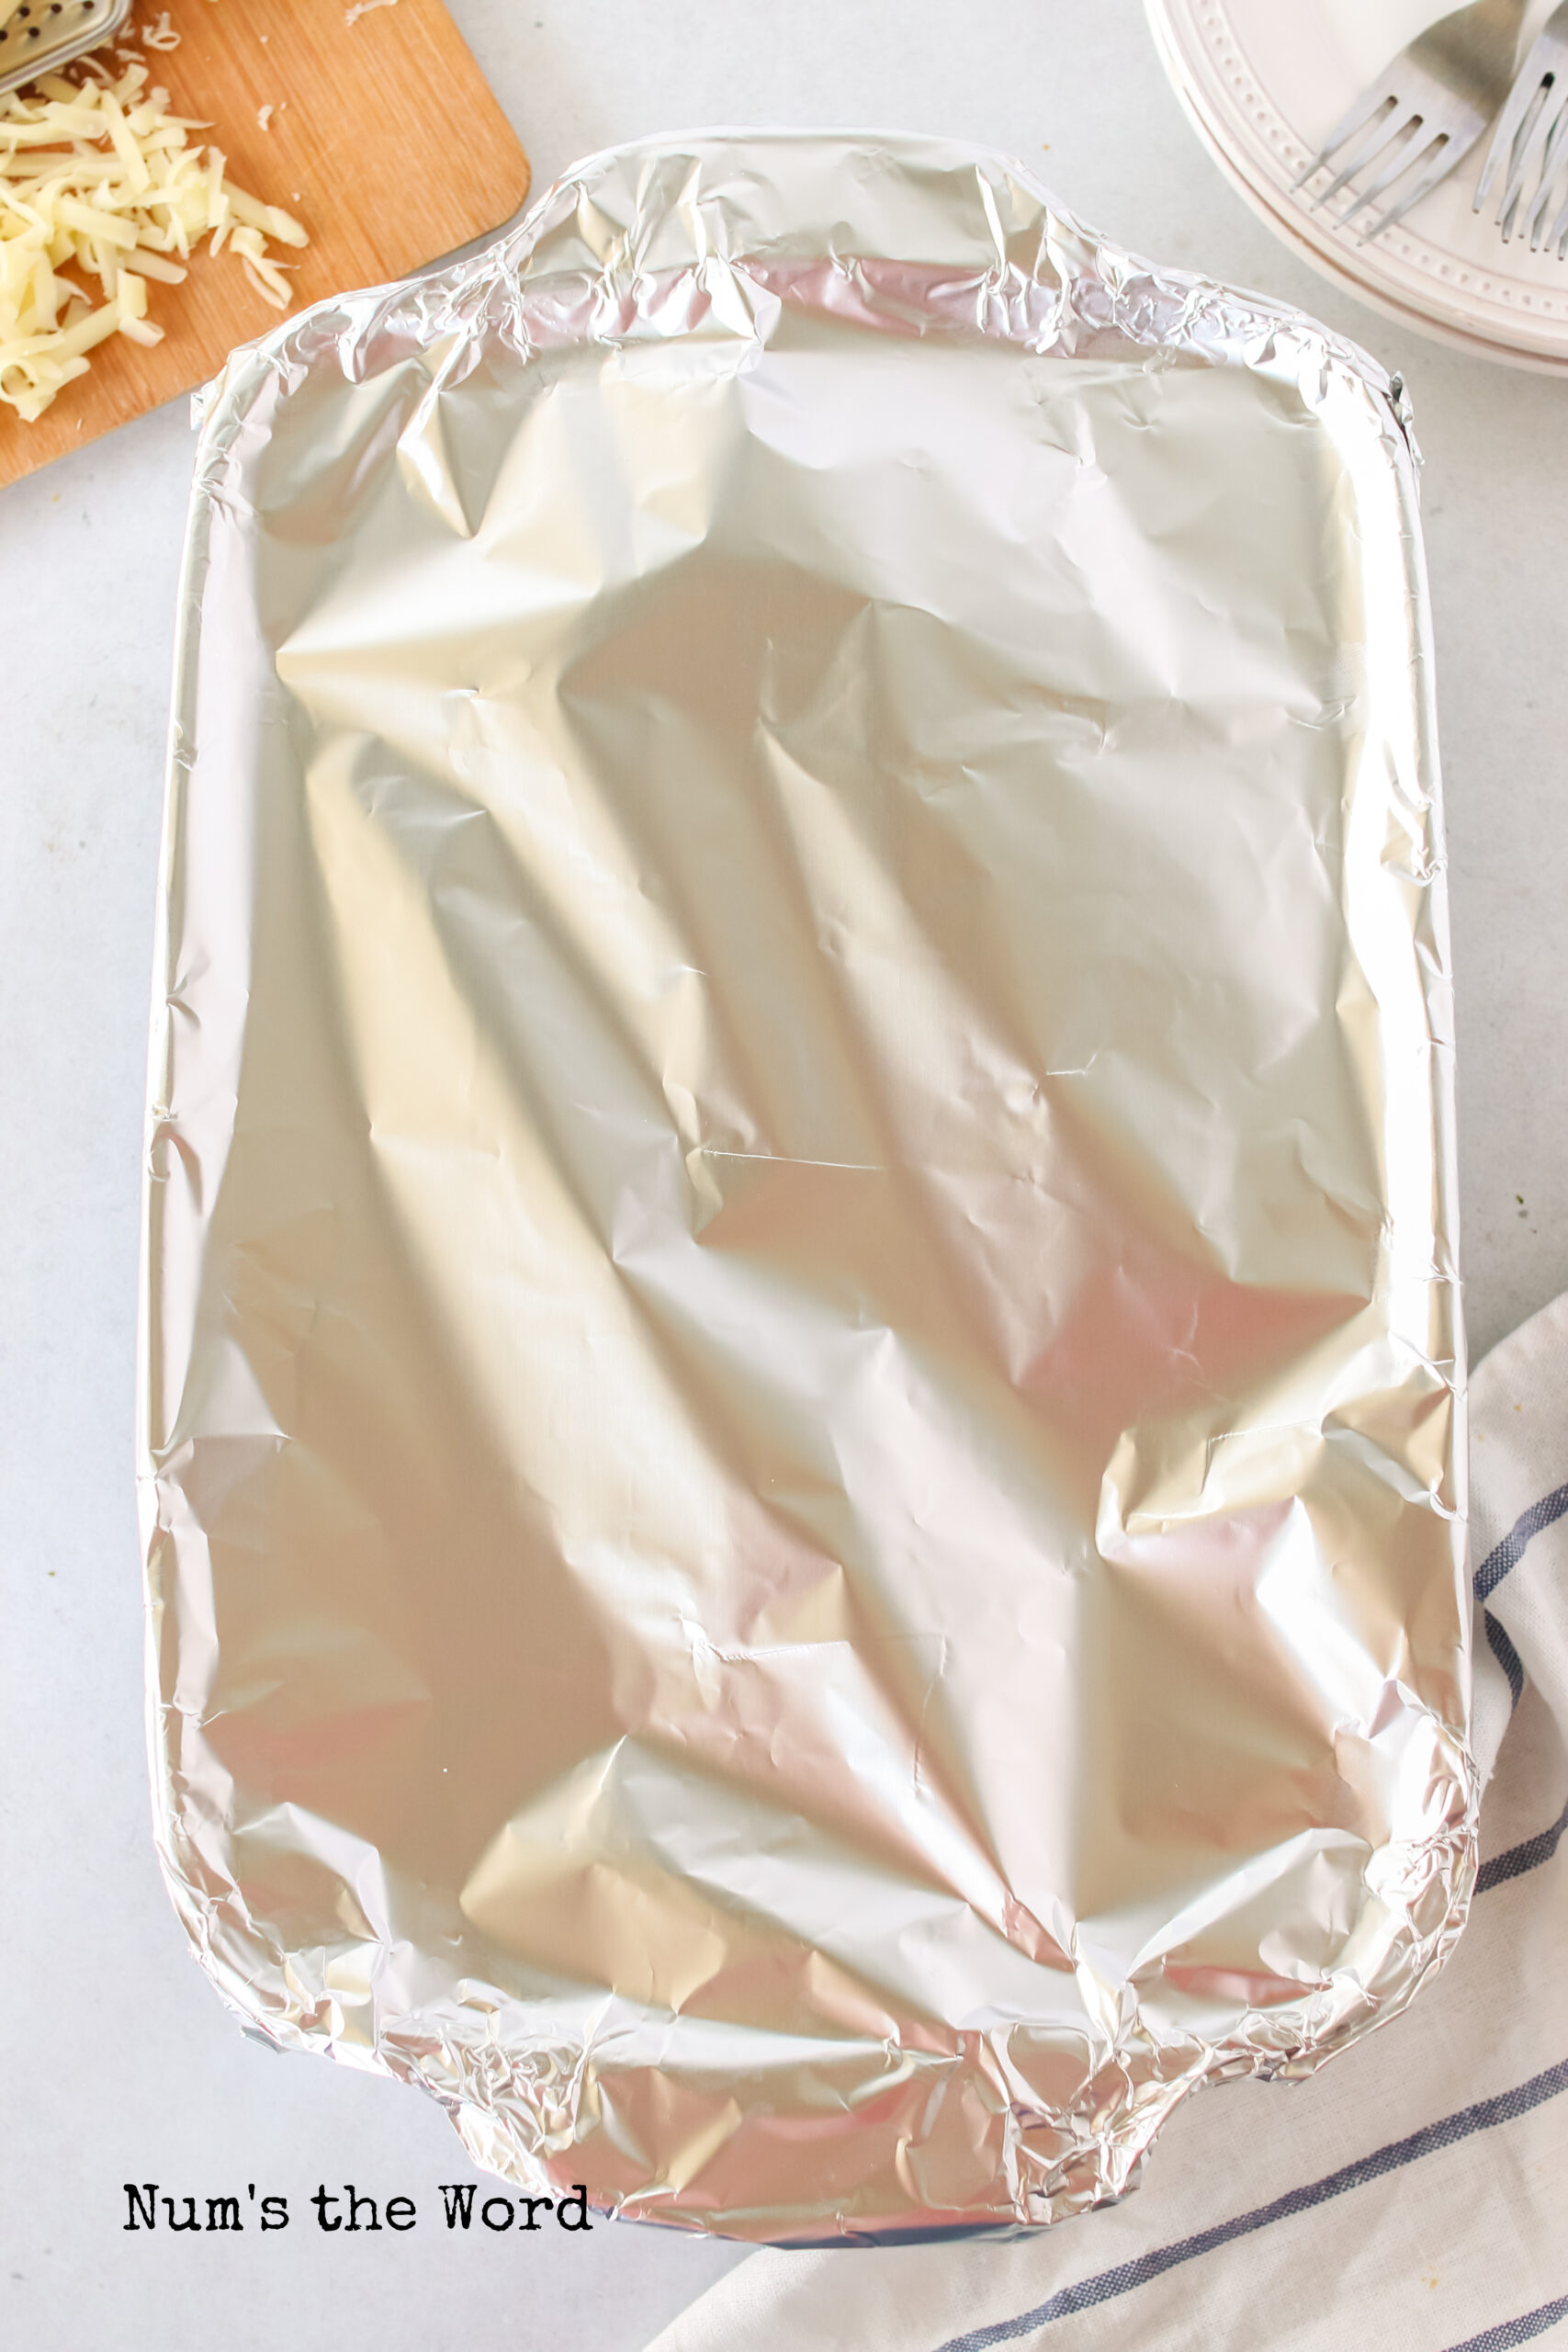 casserole covered in foil and ready to go into the oven